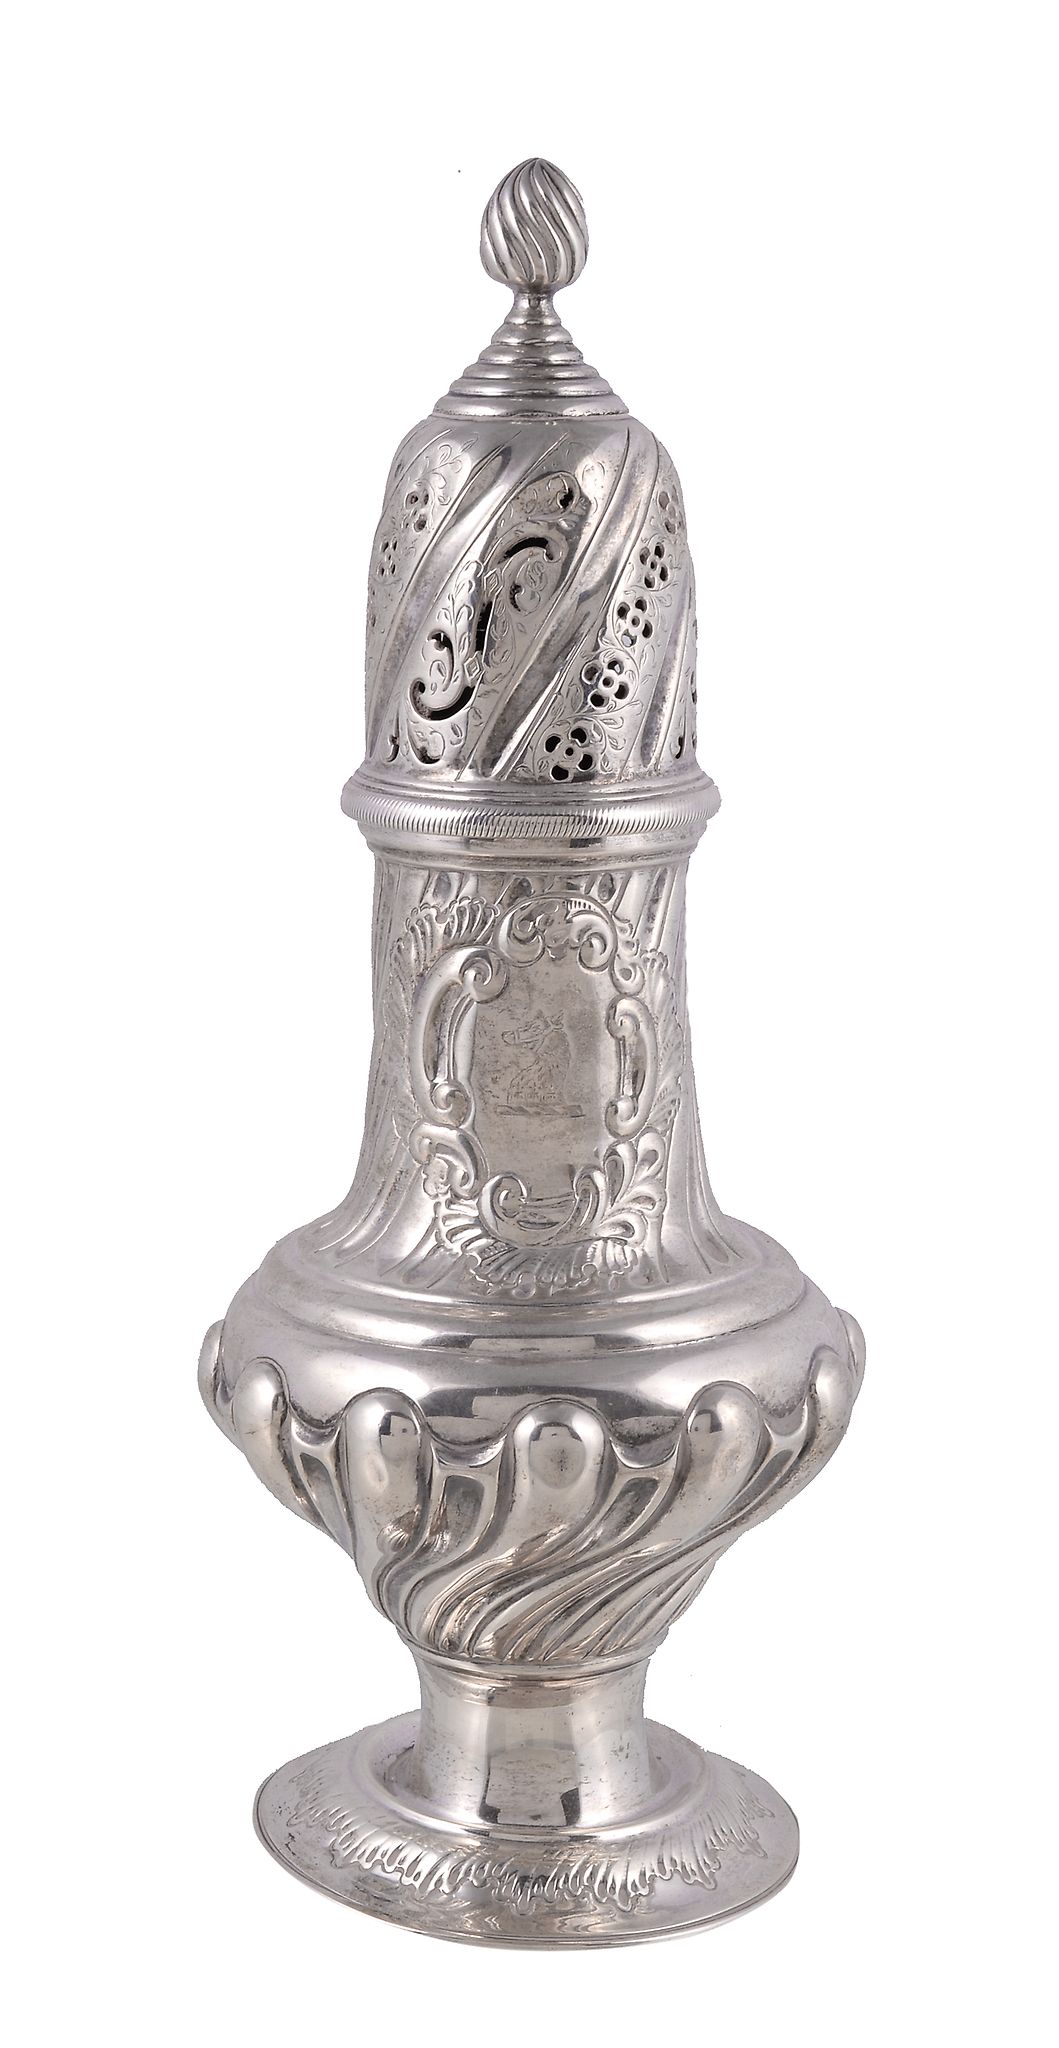 A late Victorian silver ogee baluster sugar caster by Samuel Walton Smith, London 1900, with a